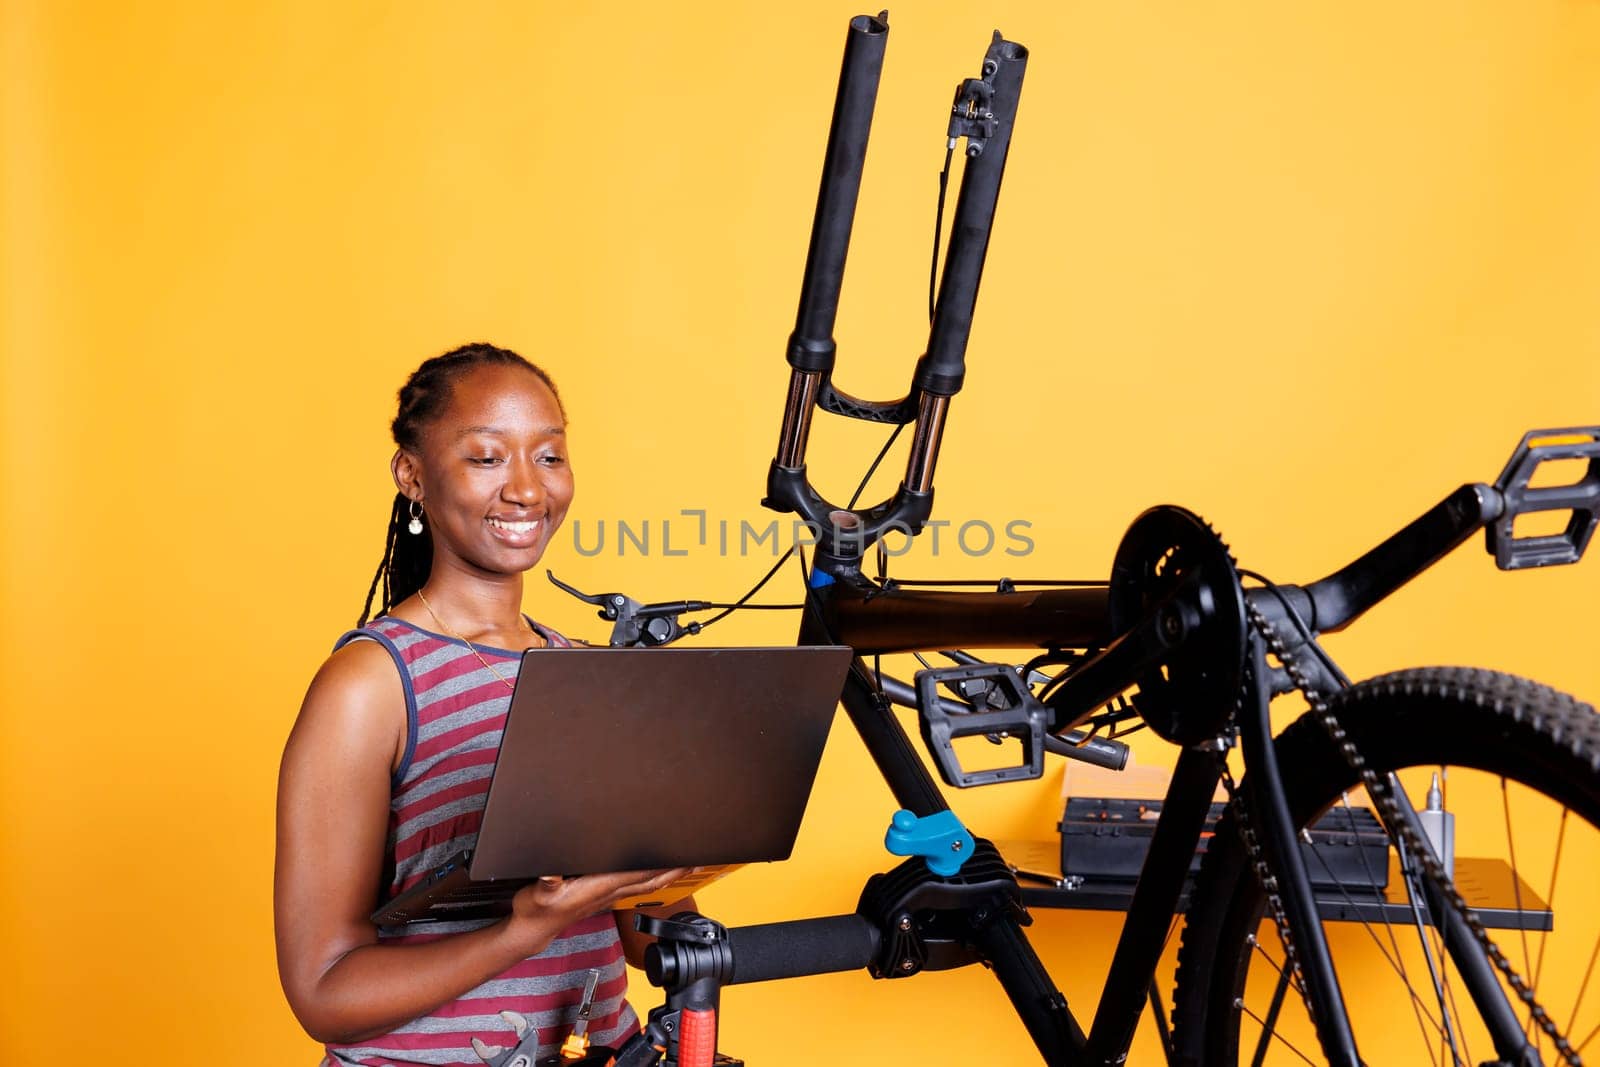 Female cyclist of african american ethnicity fixes damaged bike using toolkit and laptop to research solutions. Using minicomputer and professional equipment, black woman is repairing broken bicycle.